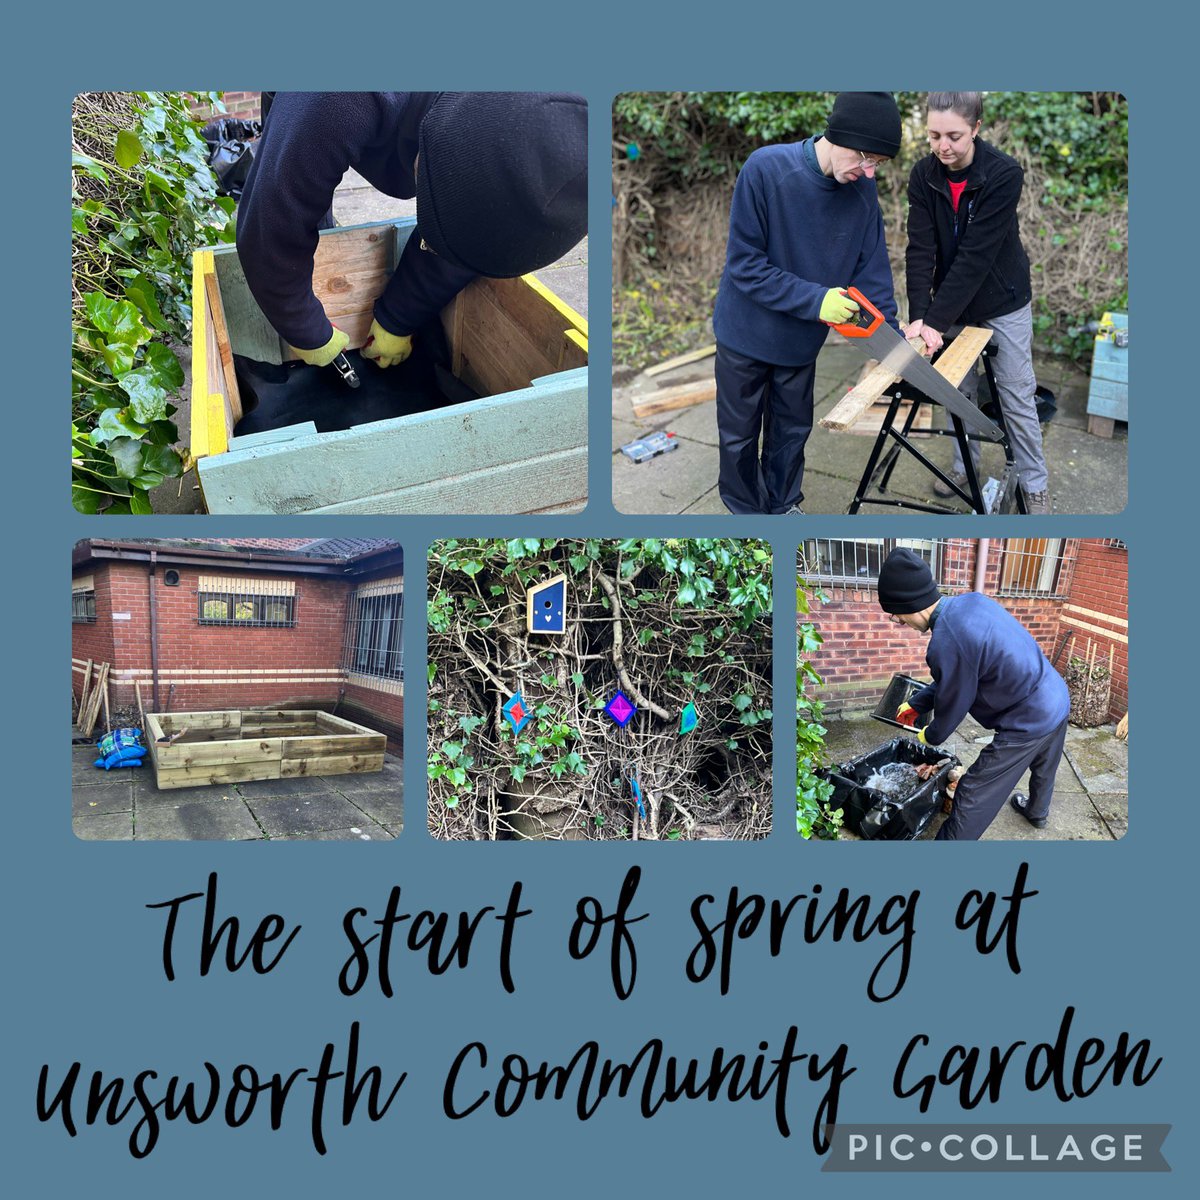 Spring has sprung at Unsworth community garden 😃🌷🌸 our pond is underway along with a second planter. Contact me if you are interested in joining our fun group. @myplace2gr0w @Bury_Gp_Fed @LoveWhitefield @LoveUnsworth #socialprescribing #community